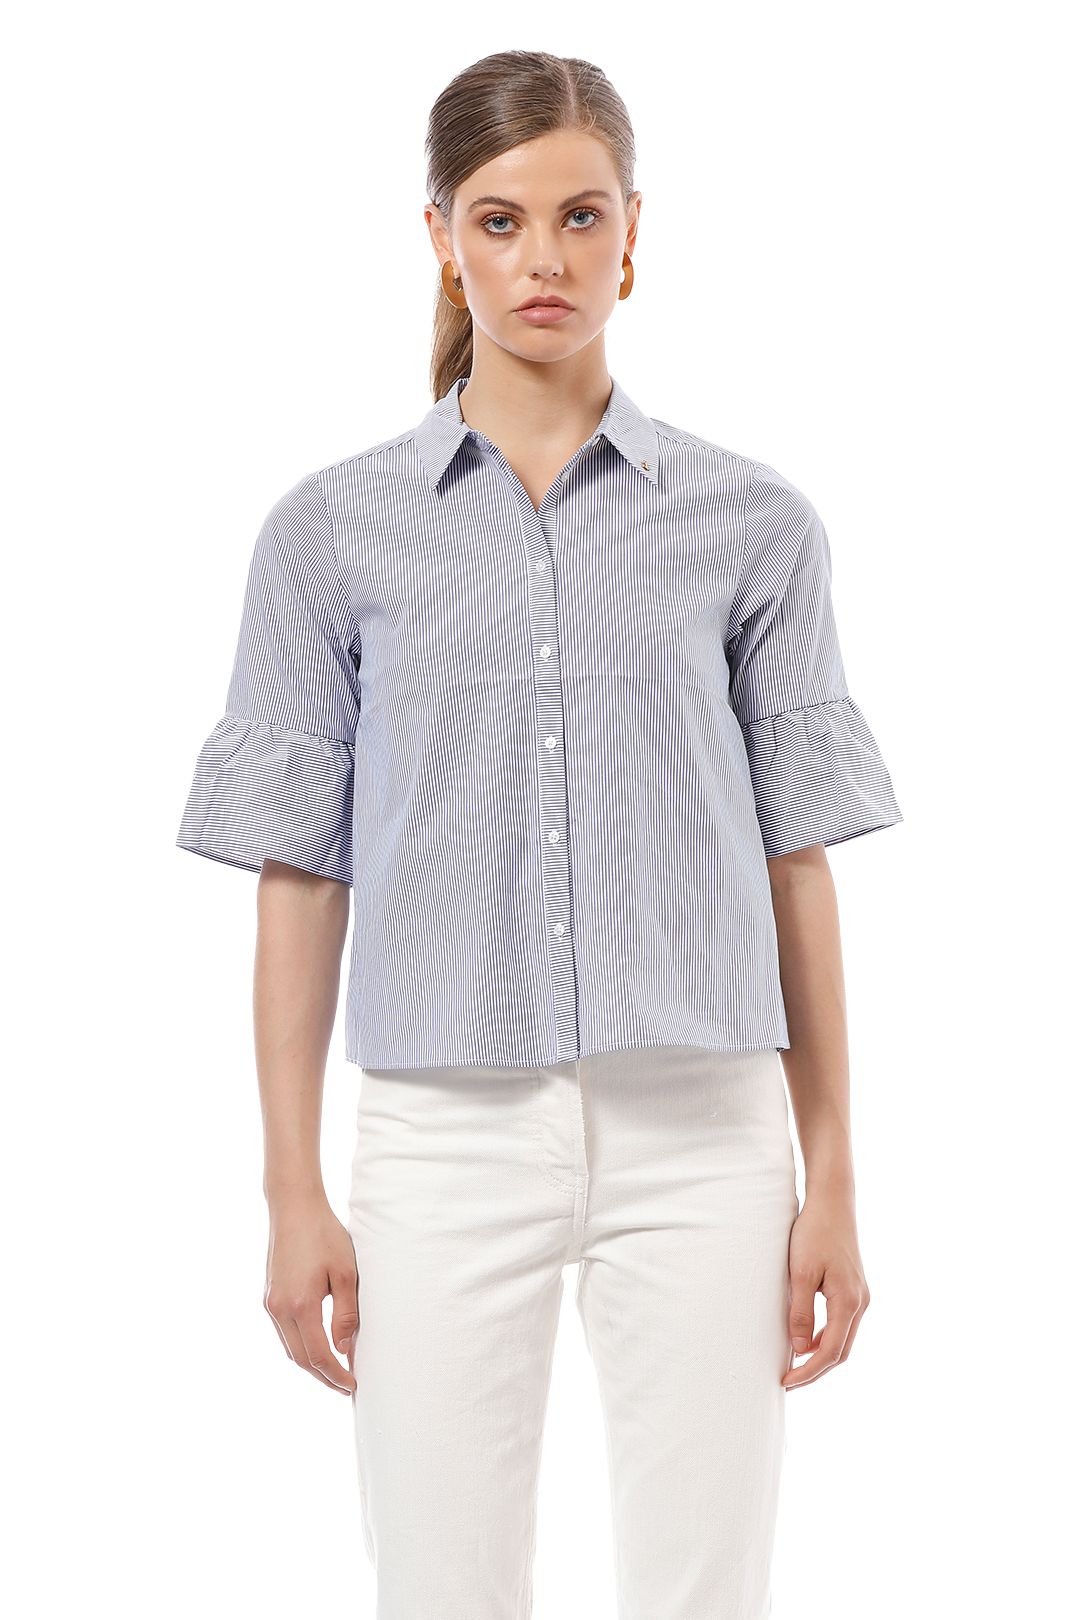 Special Sleeve Ruffle Shirt by Scotch & Soda for Hire